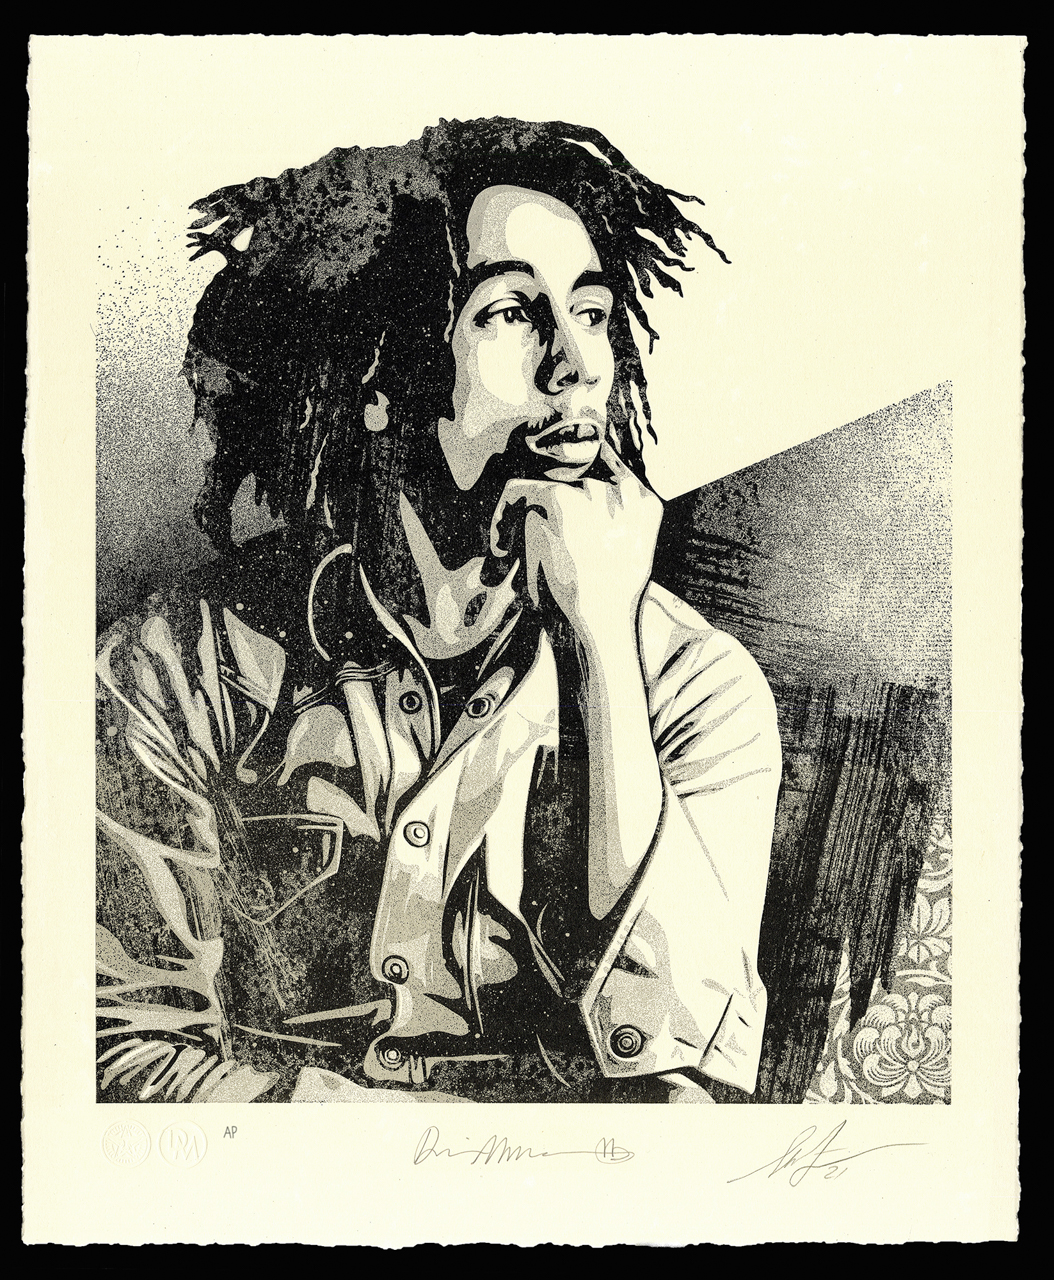 Bob Marley 40th Letterpresses Available Tuesday, May 18th @ 10 AM